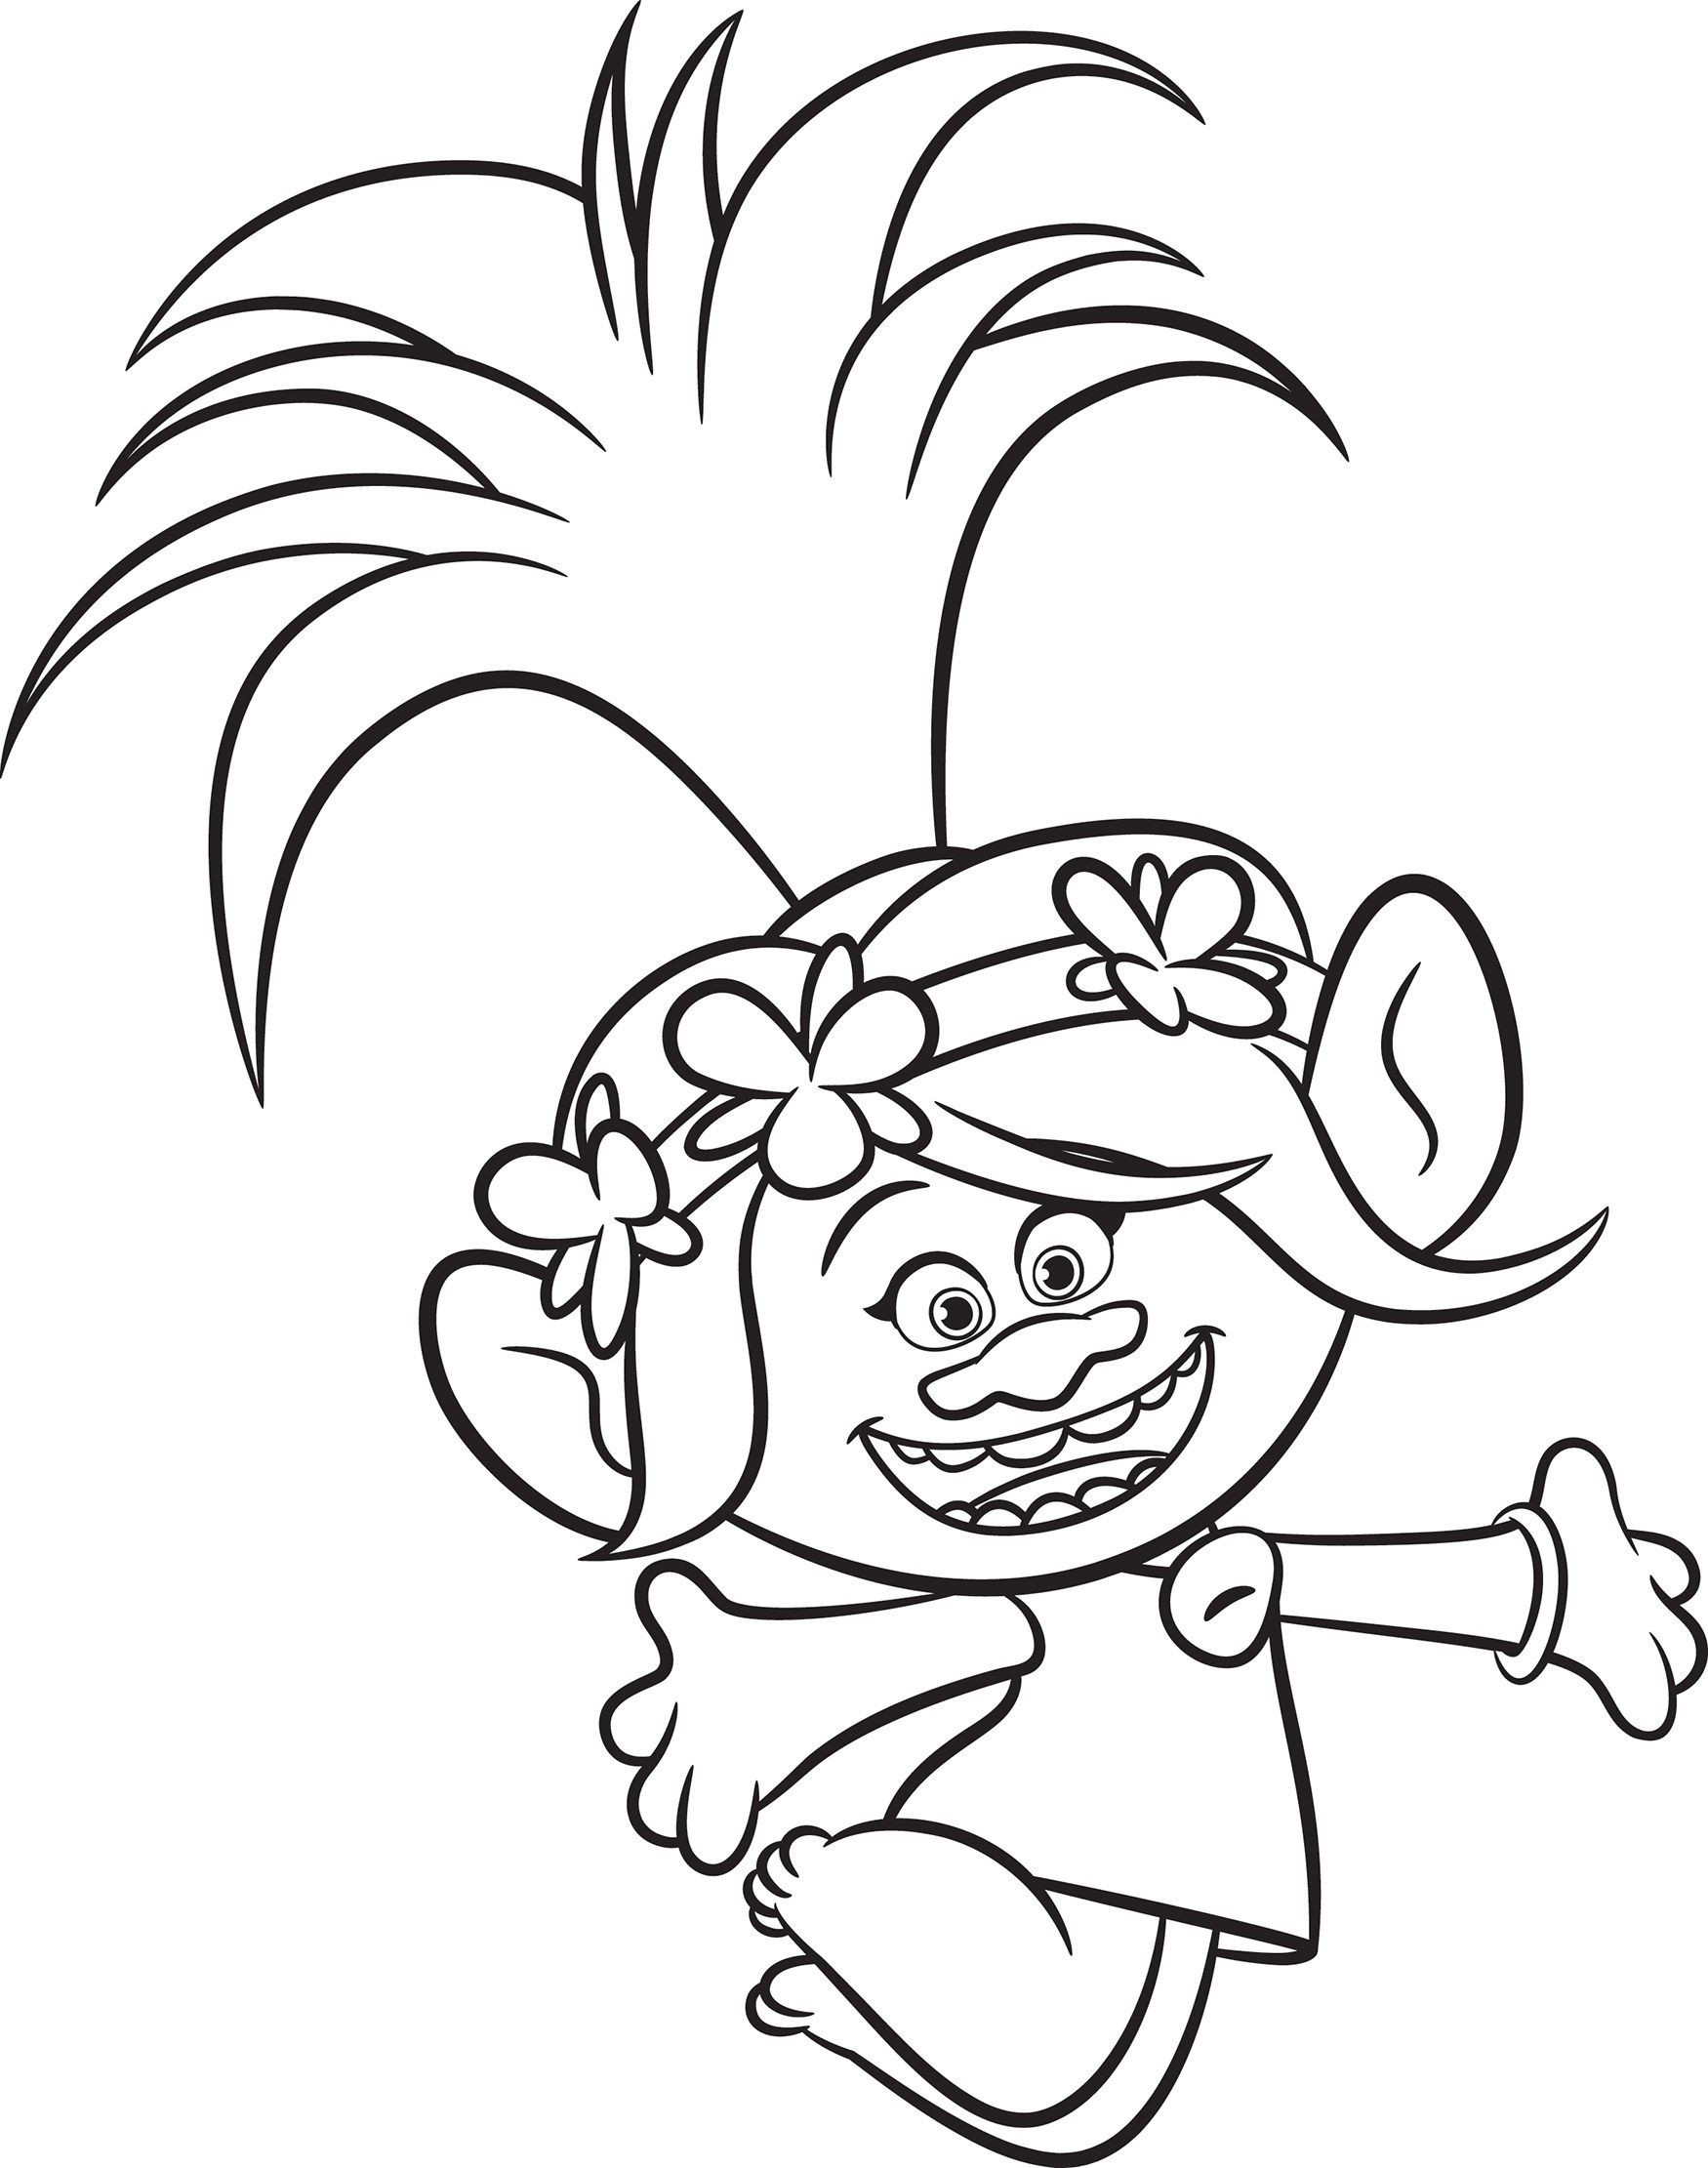 Free Printable Trolls Coloring Pages
 DreamWorks Trolls Party Edition Princess Poppy Inspired